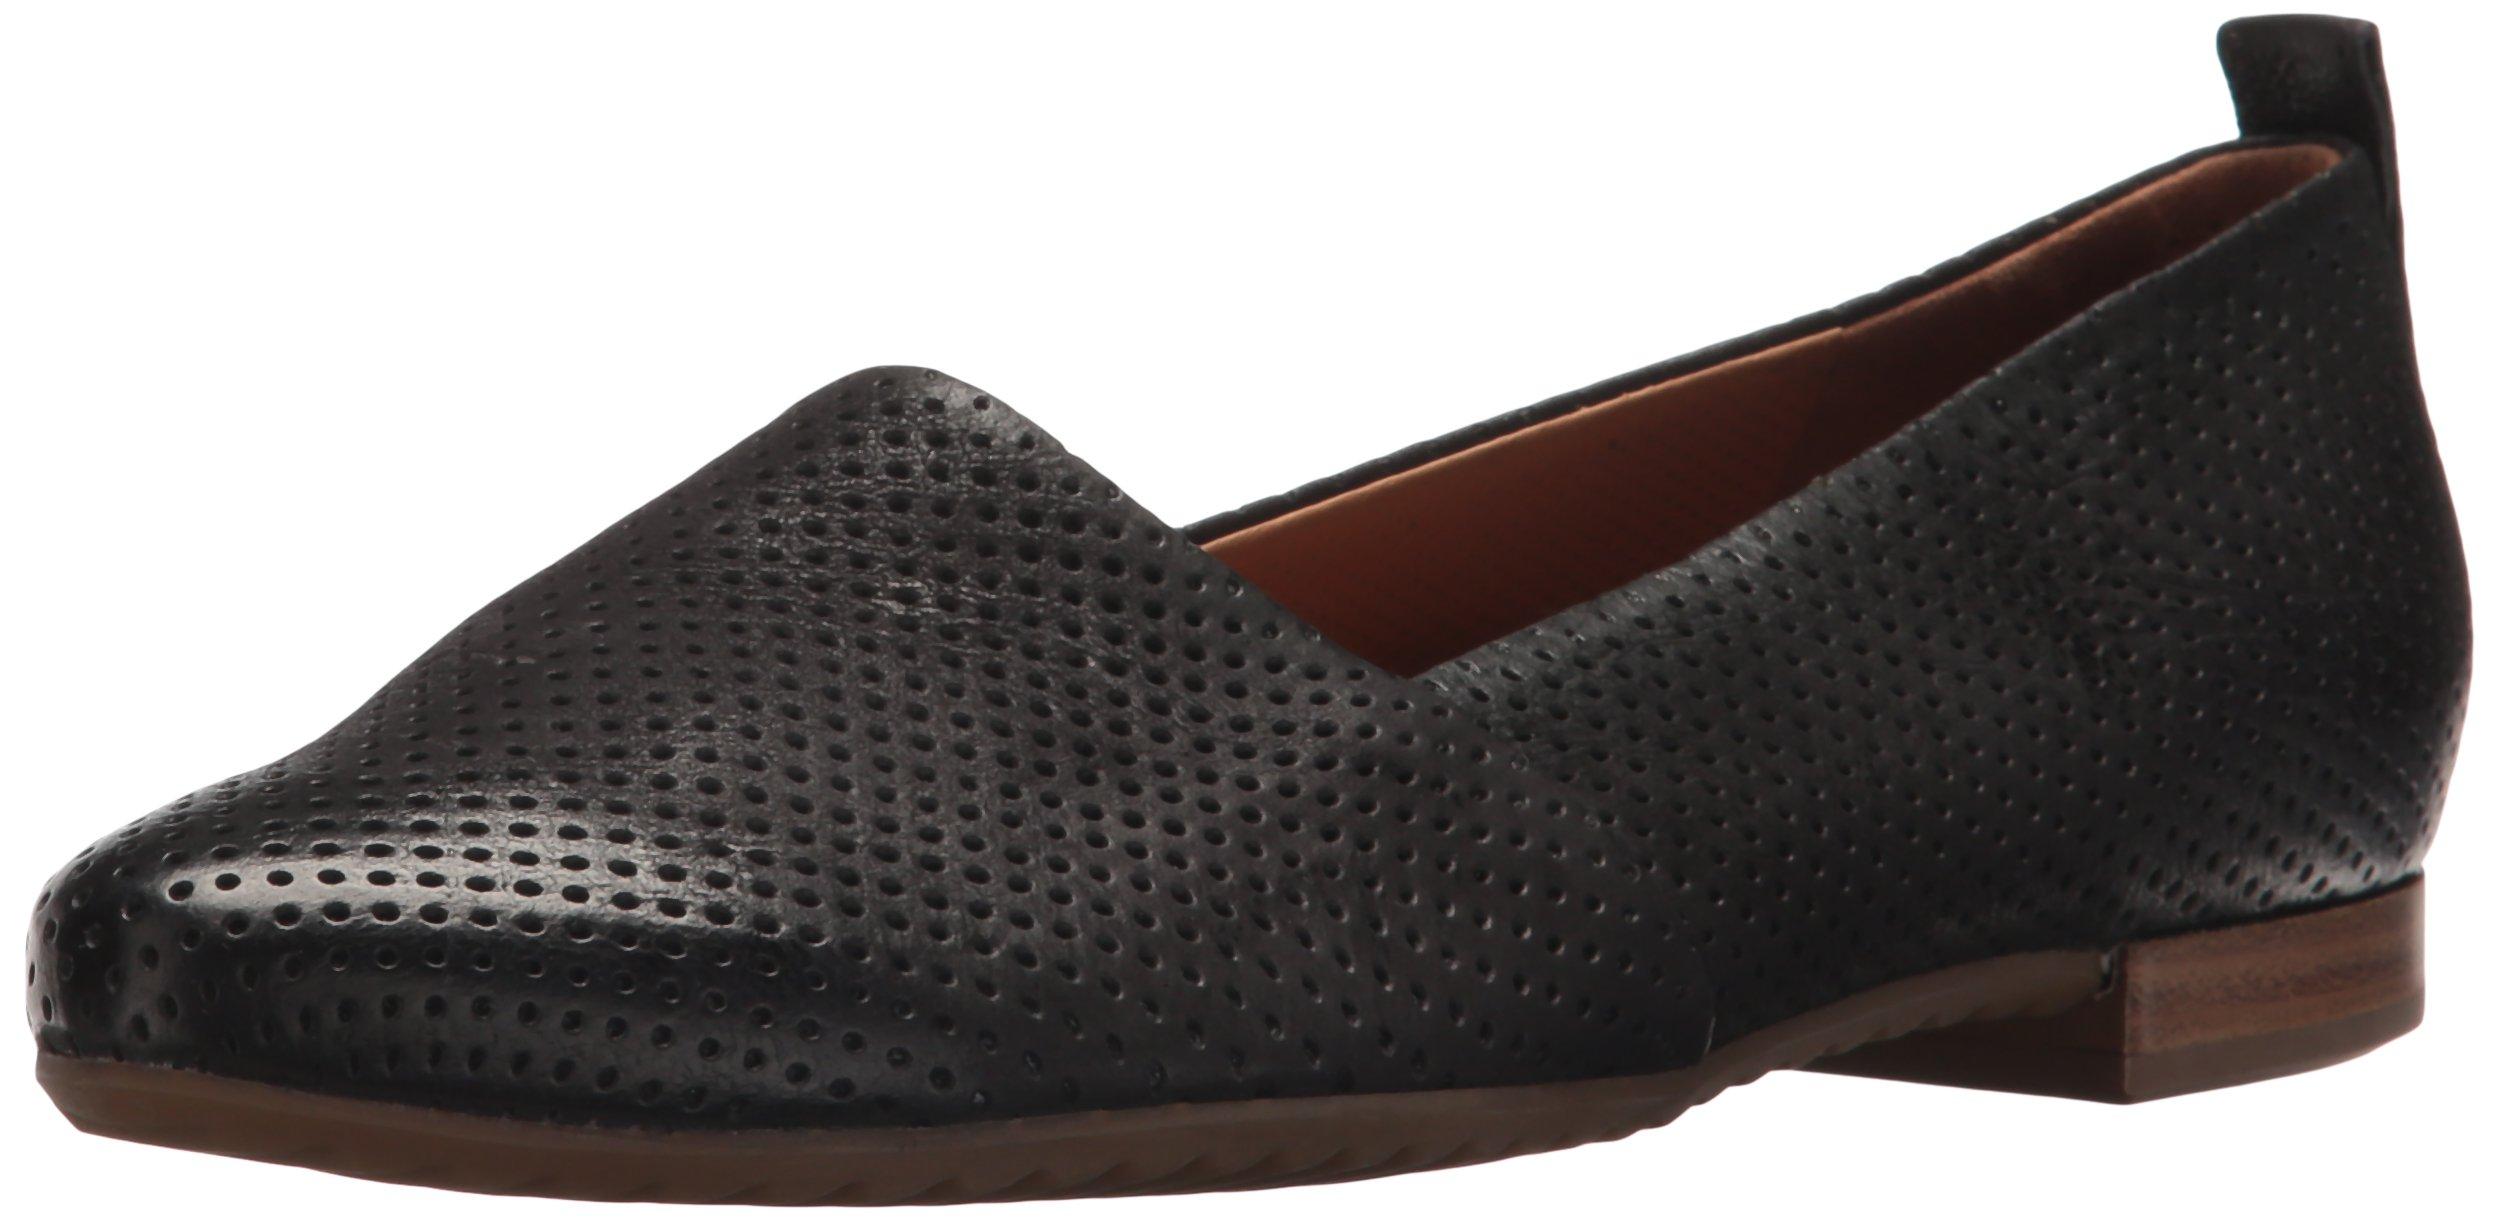 Paul Green Leather Perry Flt Loafer Flat in Black Leather (Black) | Lyst